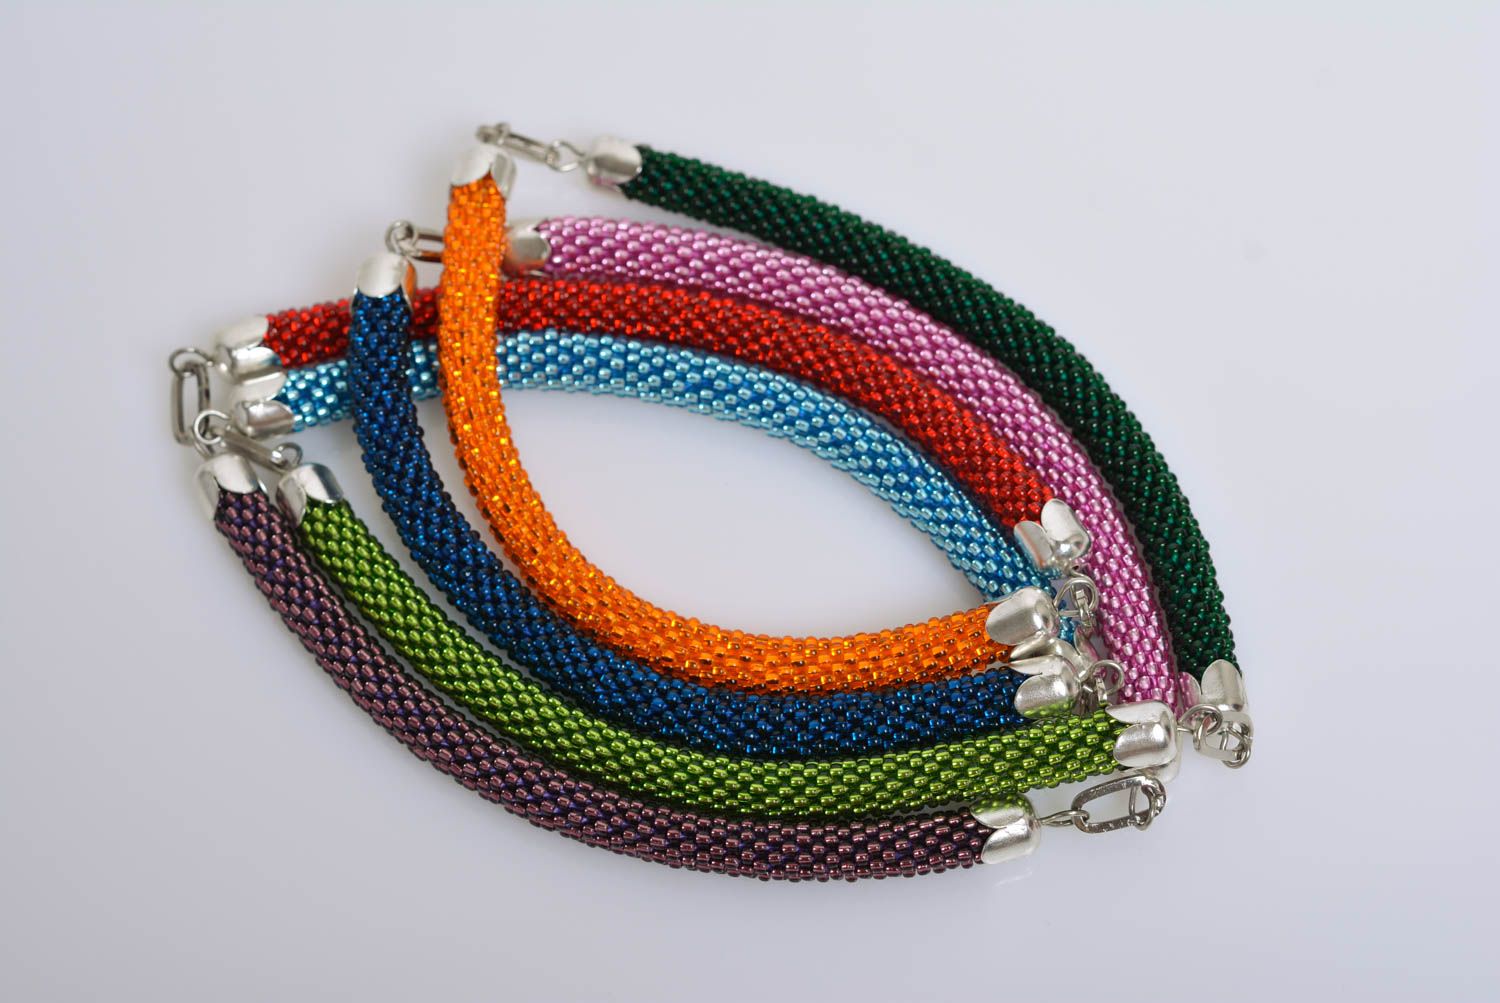 Handmade designer long bead woven cord necklace with bright colorful elements photo 4